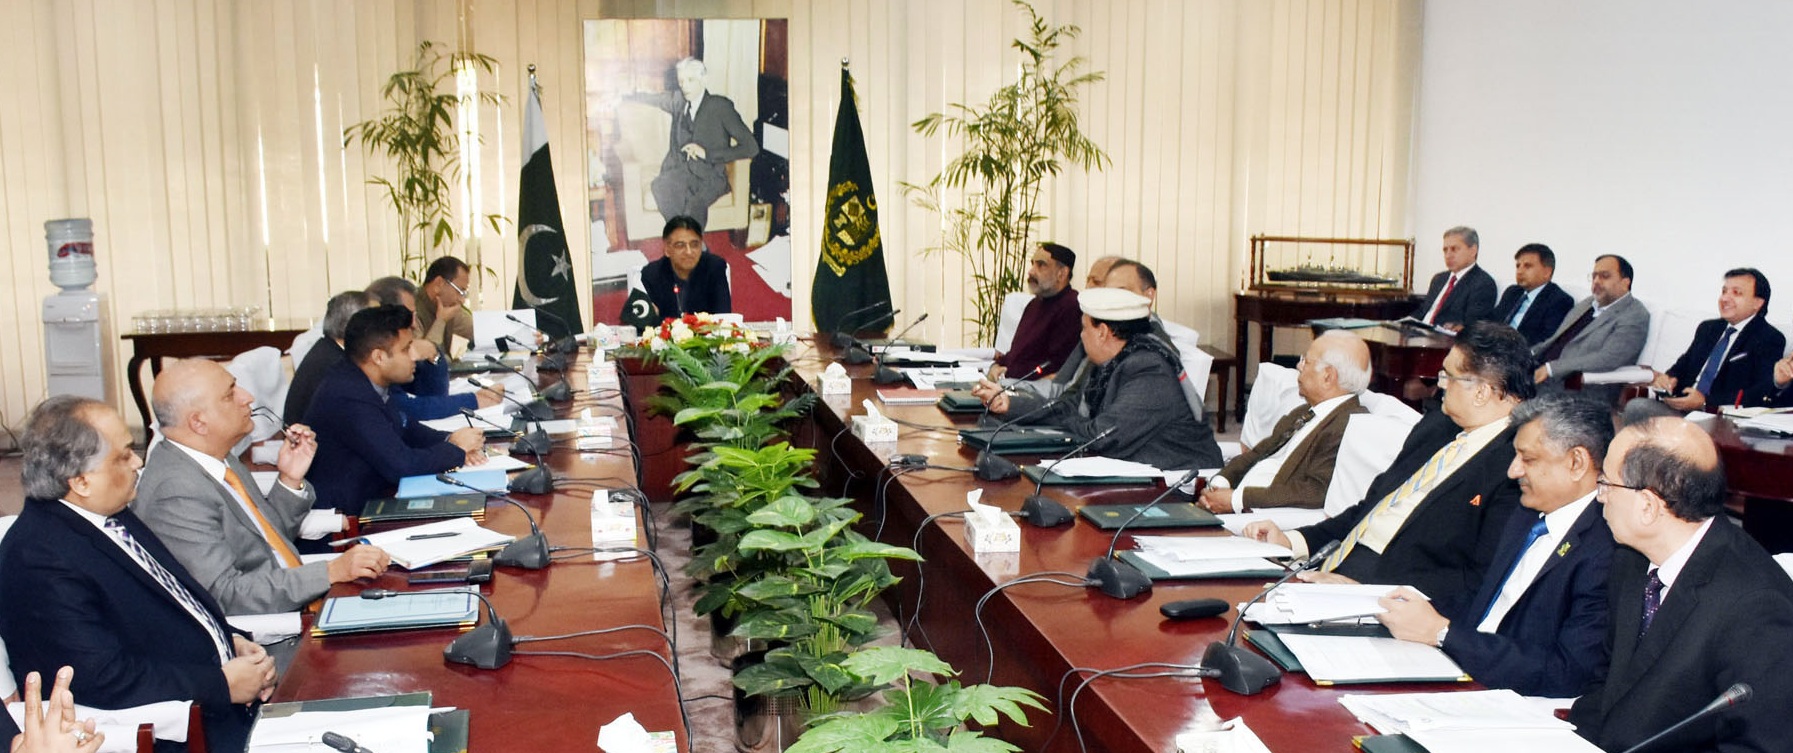 Federal Minister for Finance, Asad Umar chairing the meeting of the Economic Coordination Committee of the Cabinet at the Cabinet Division, Islamabad on February 19, 2019.